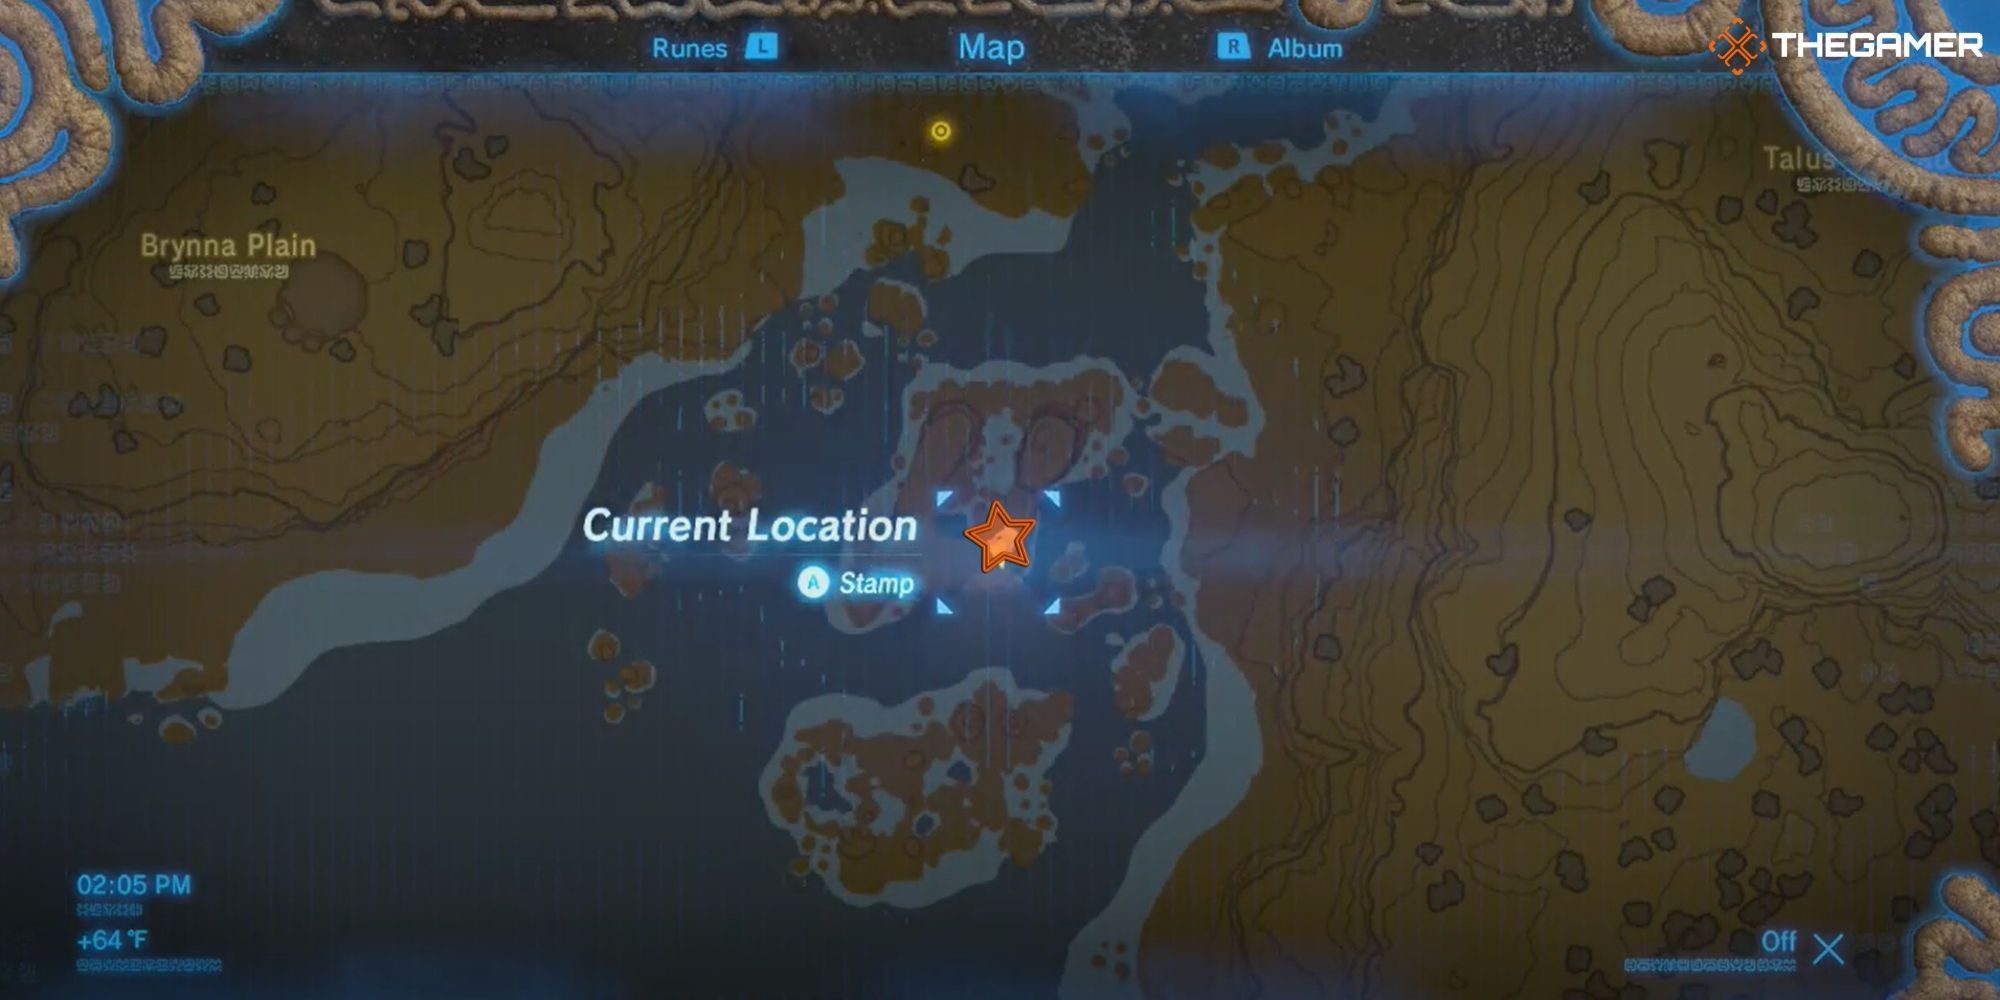 Breath of the WIld - Map of Hyrule with star marking player location